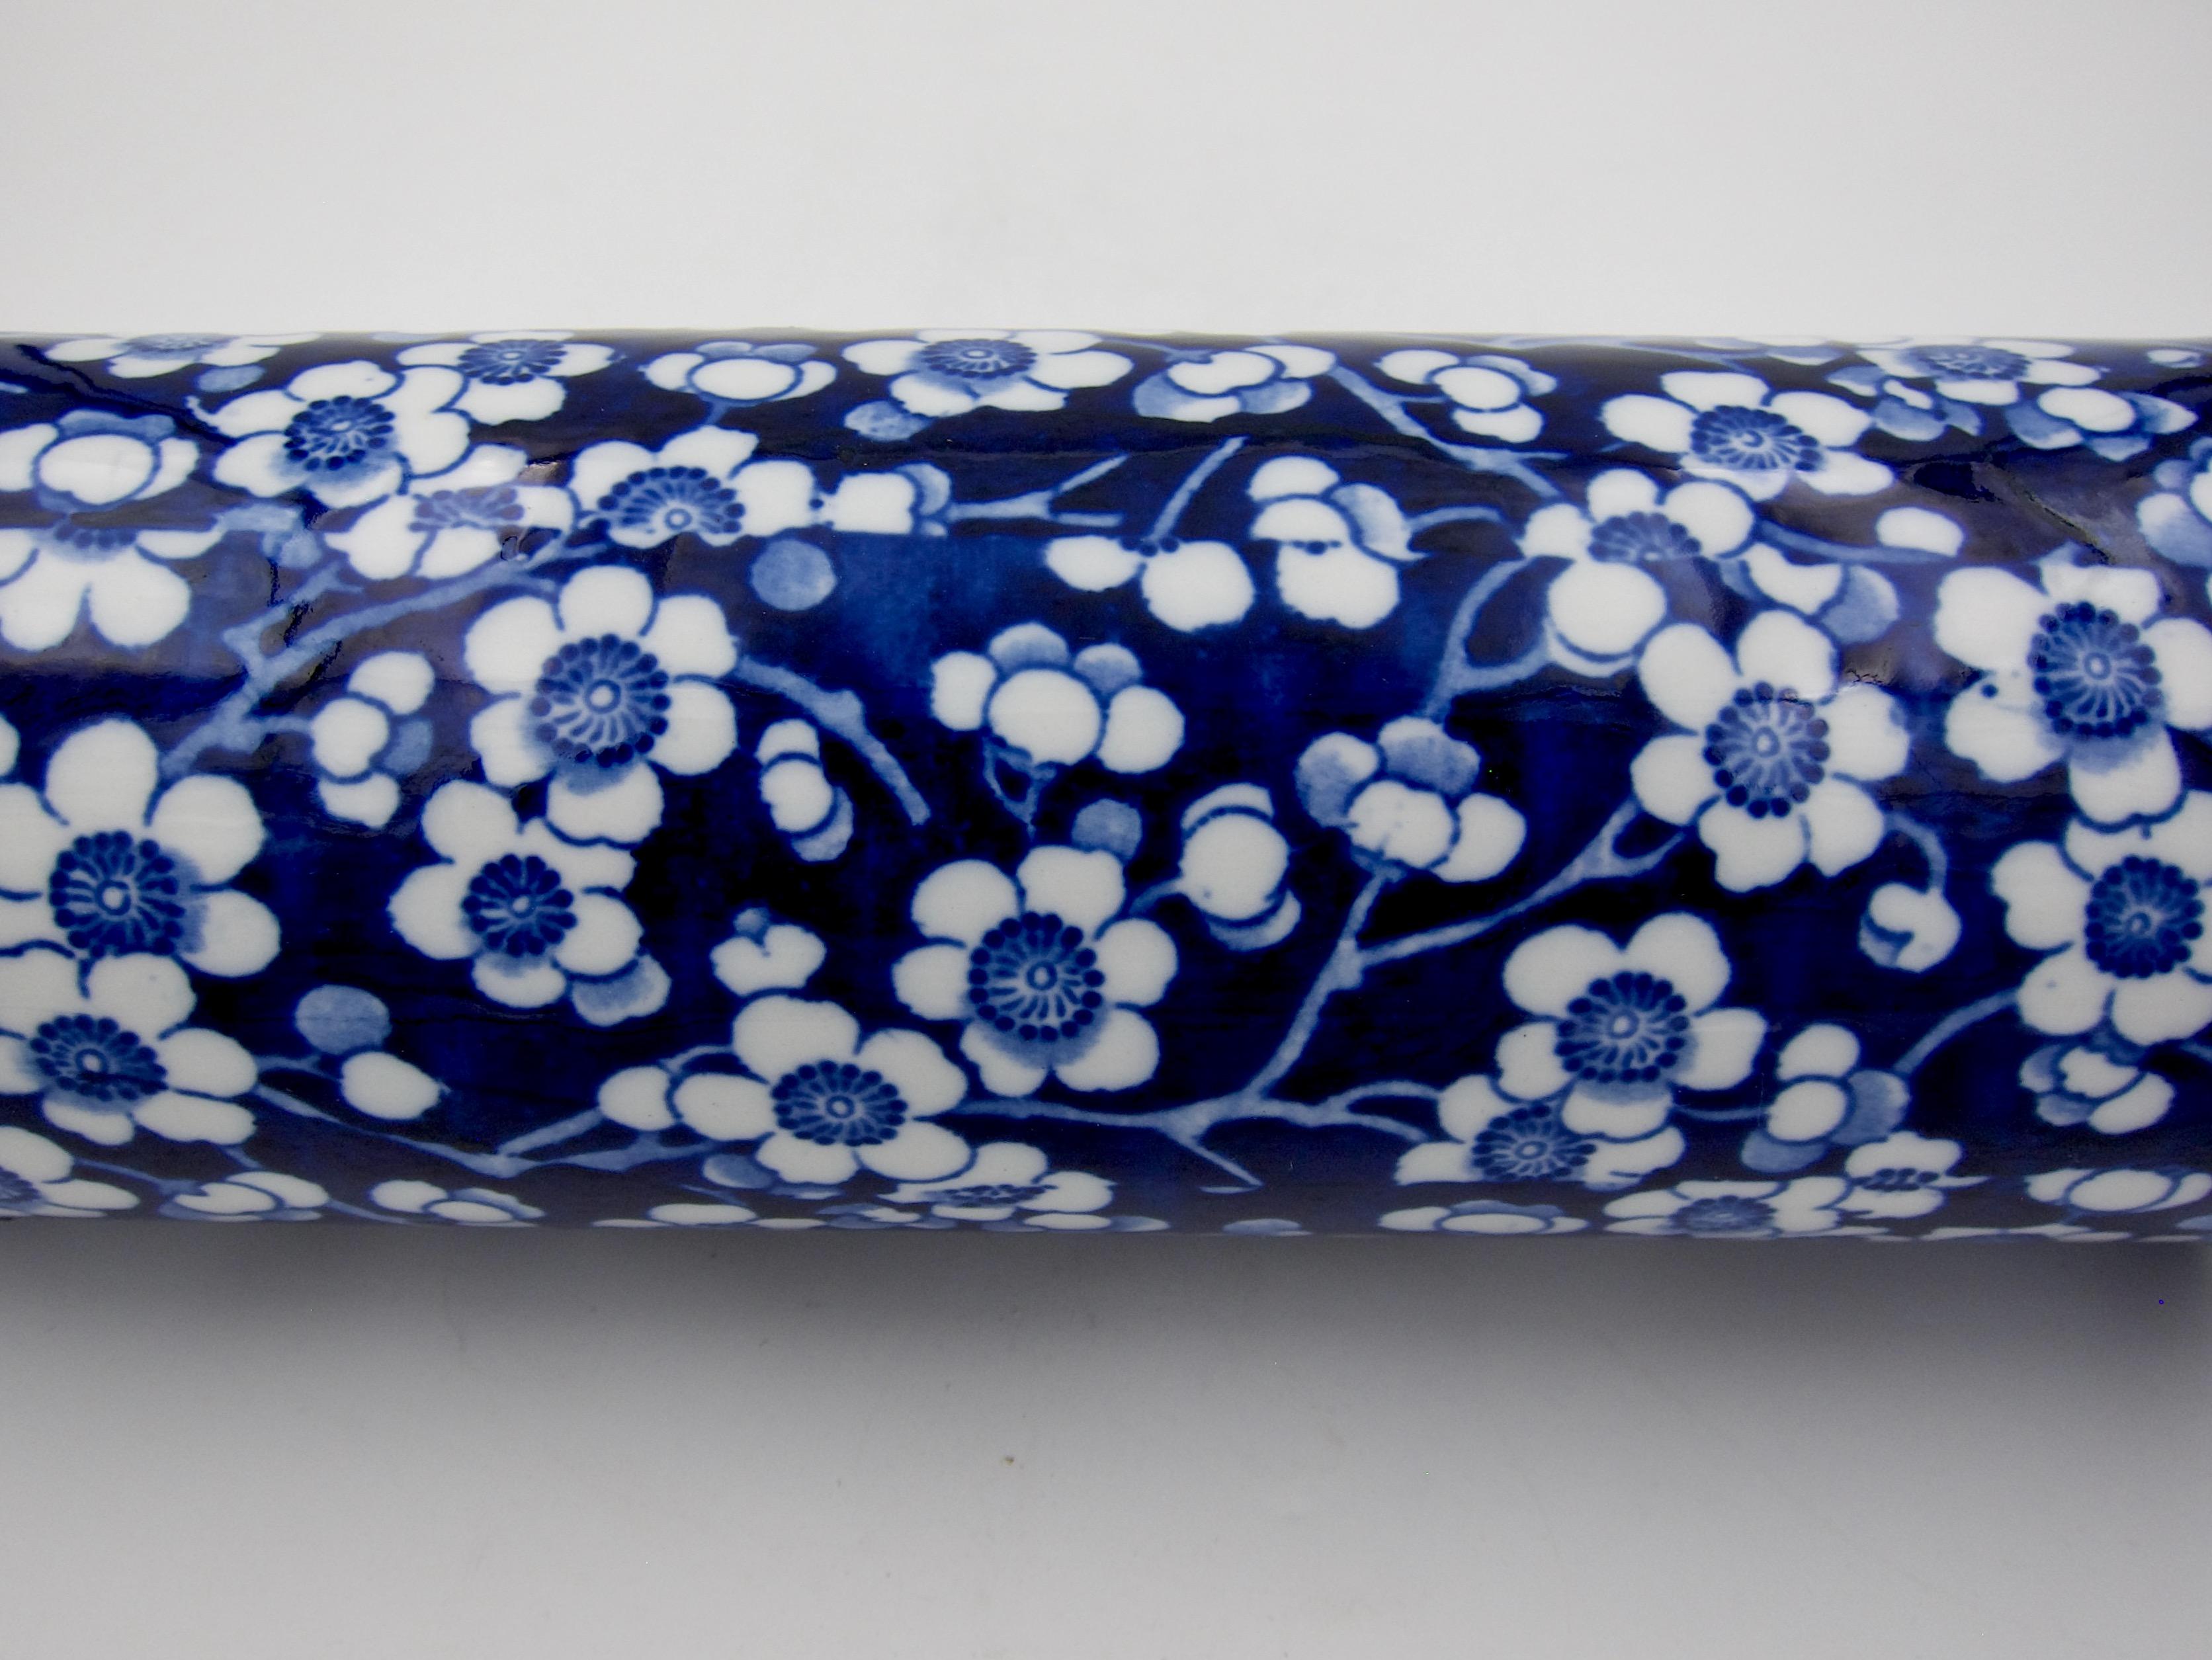 20th Century English Frederick Rhead Prunus Vase in Blue and White for Wood & Sons